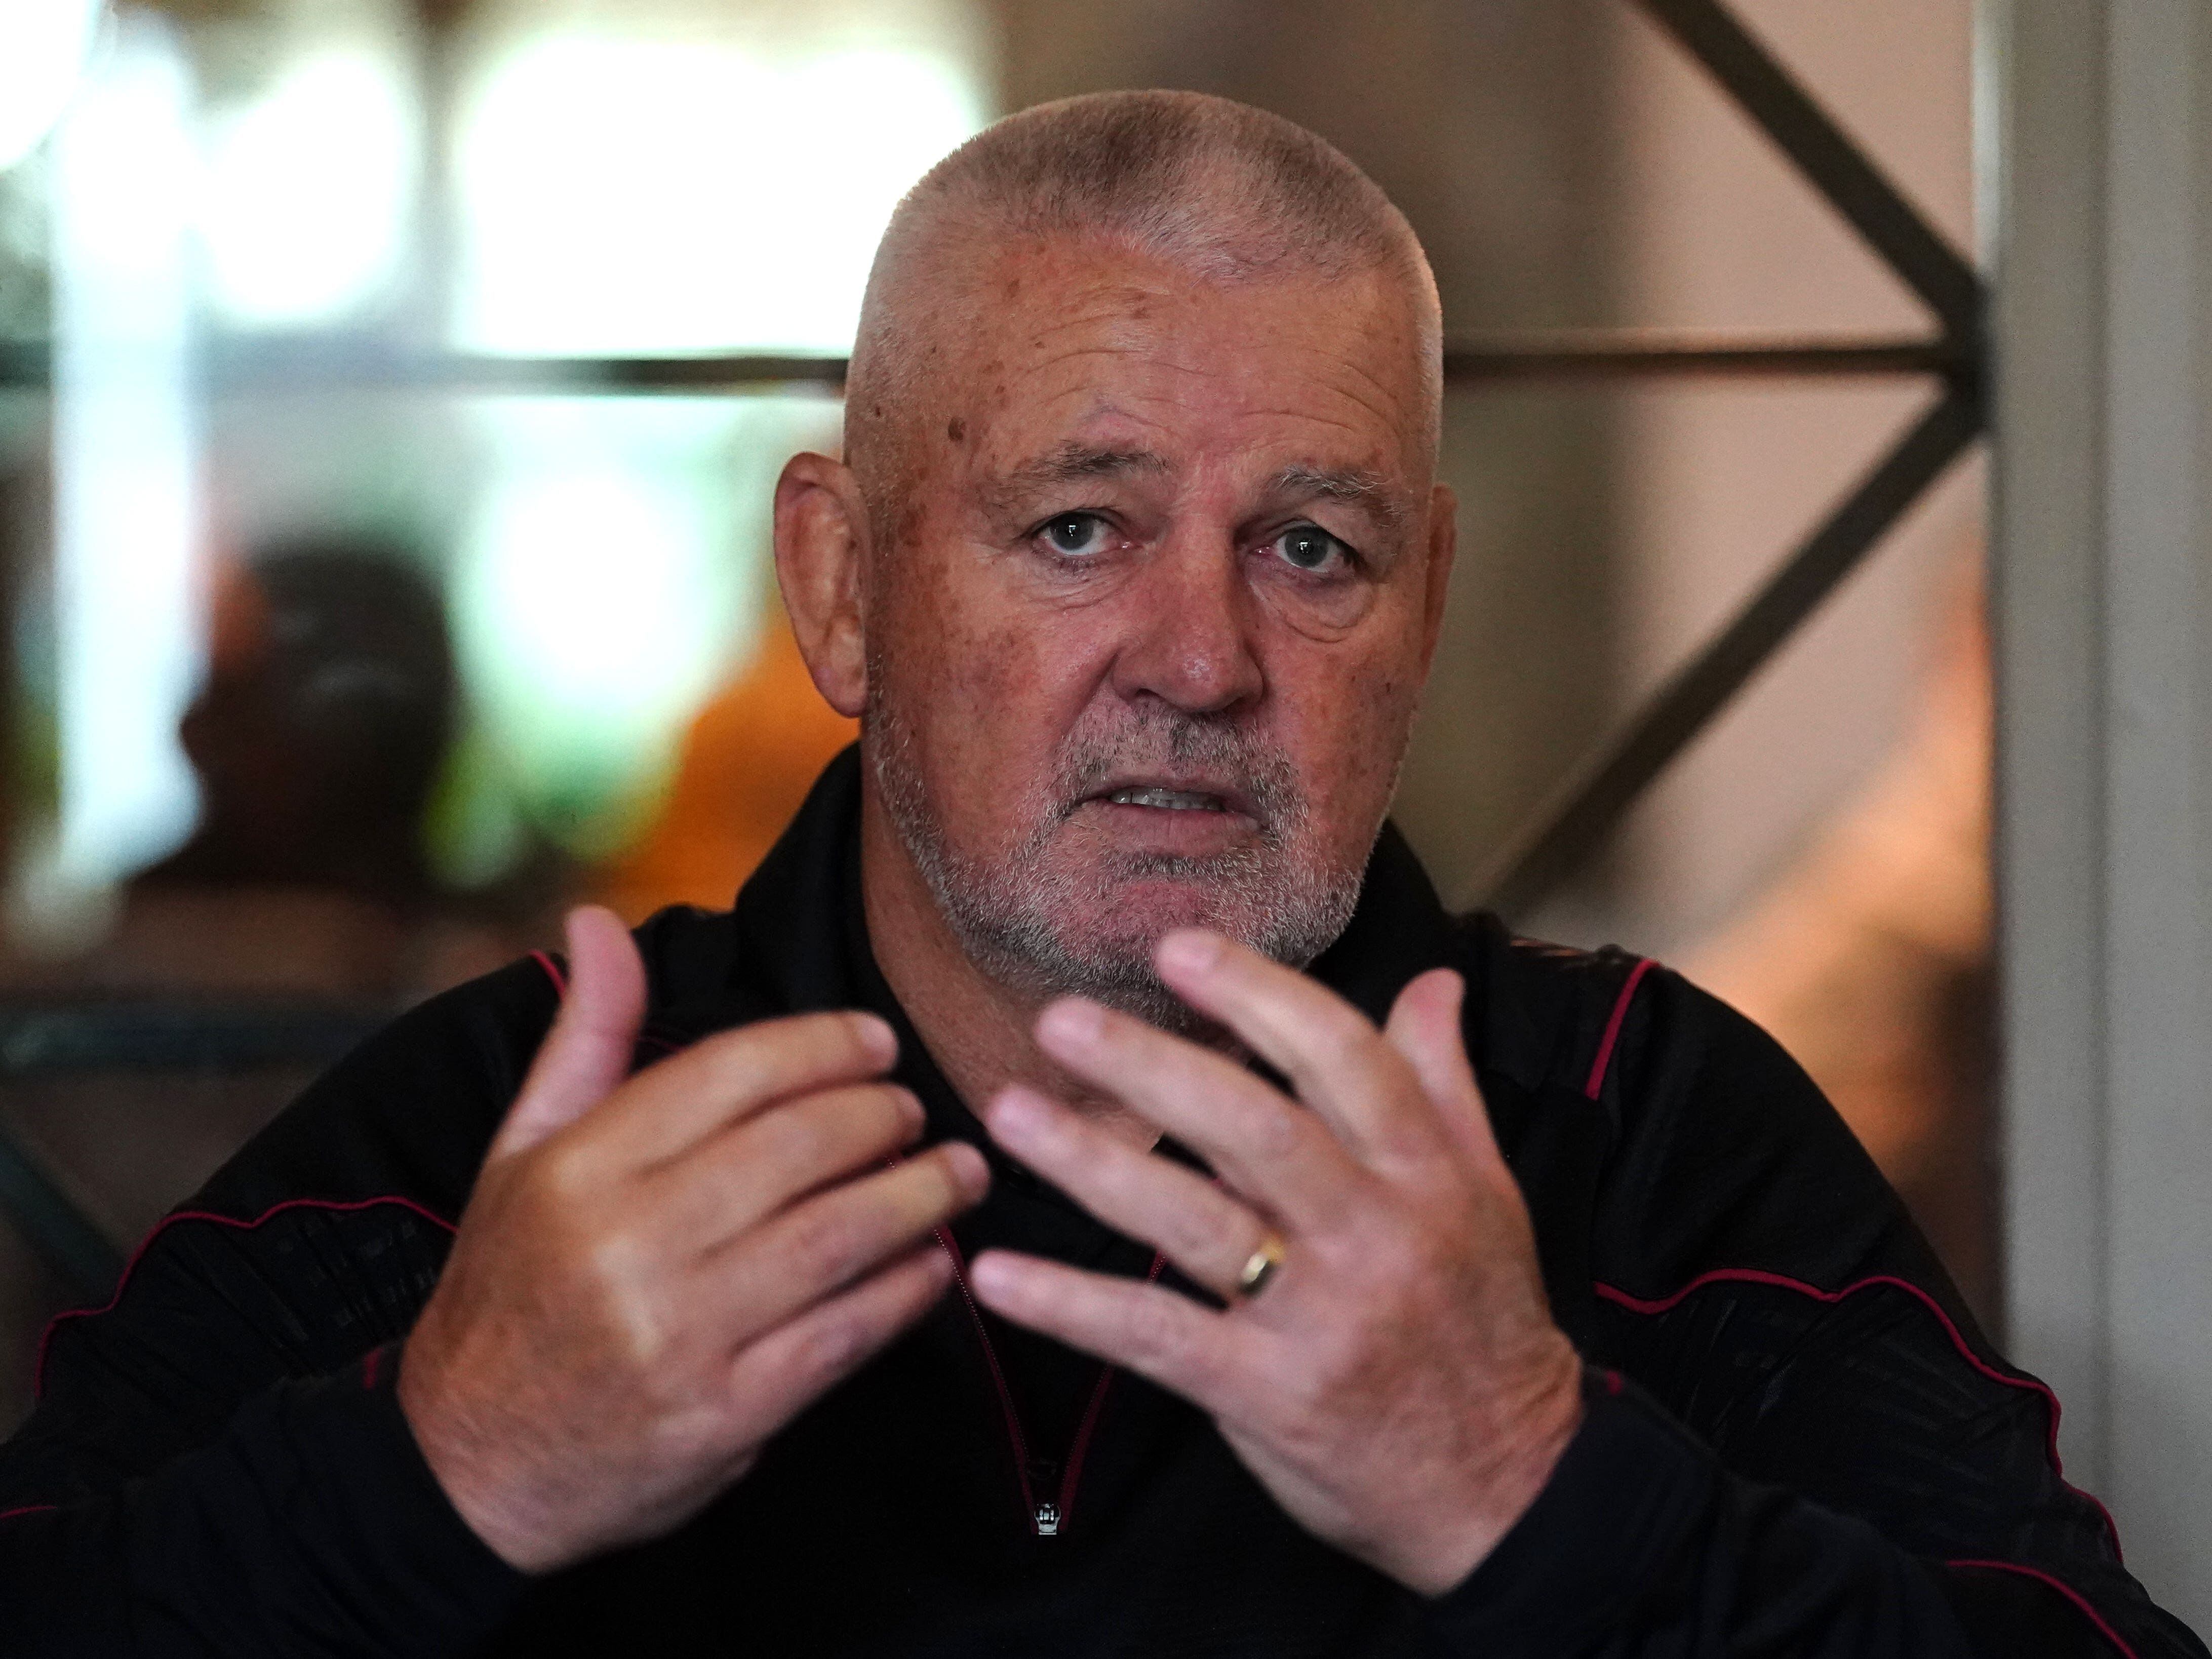 Warren Gatland says ‘the right structures’ give Ireland an advantage over Wales